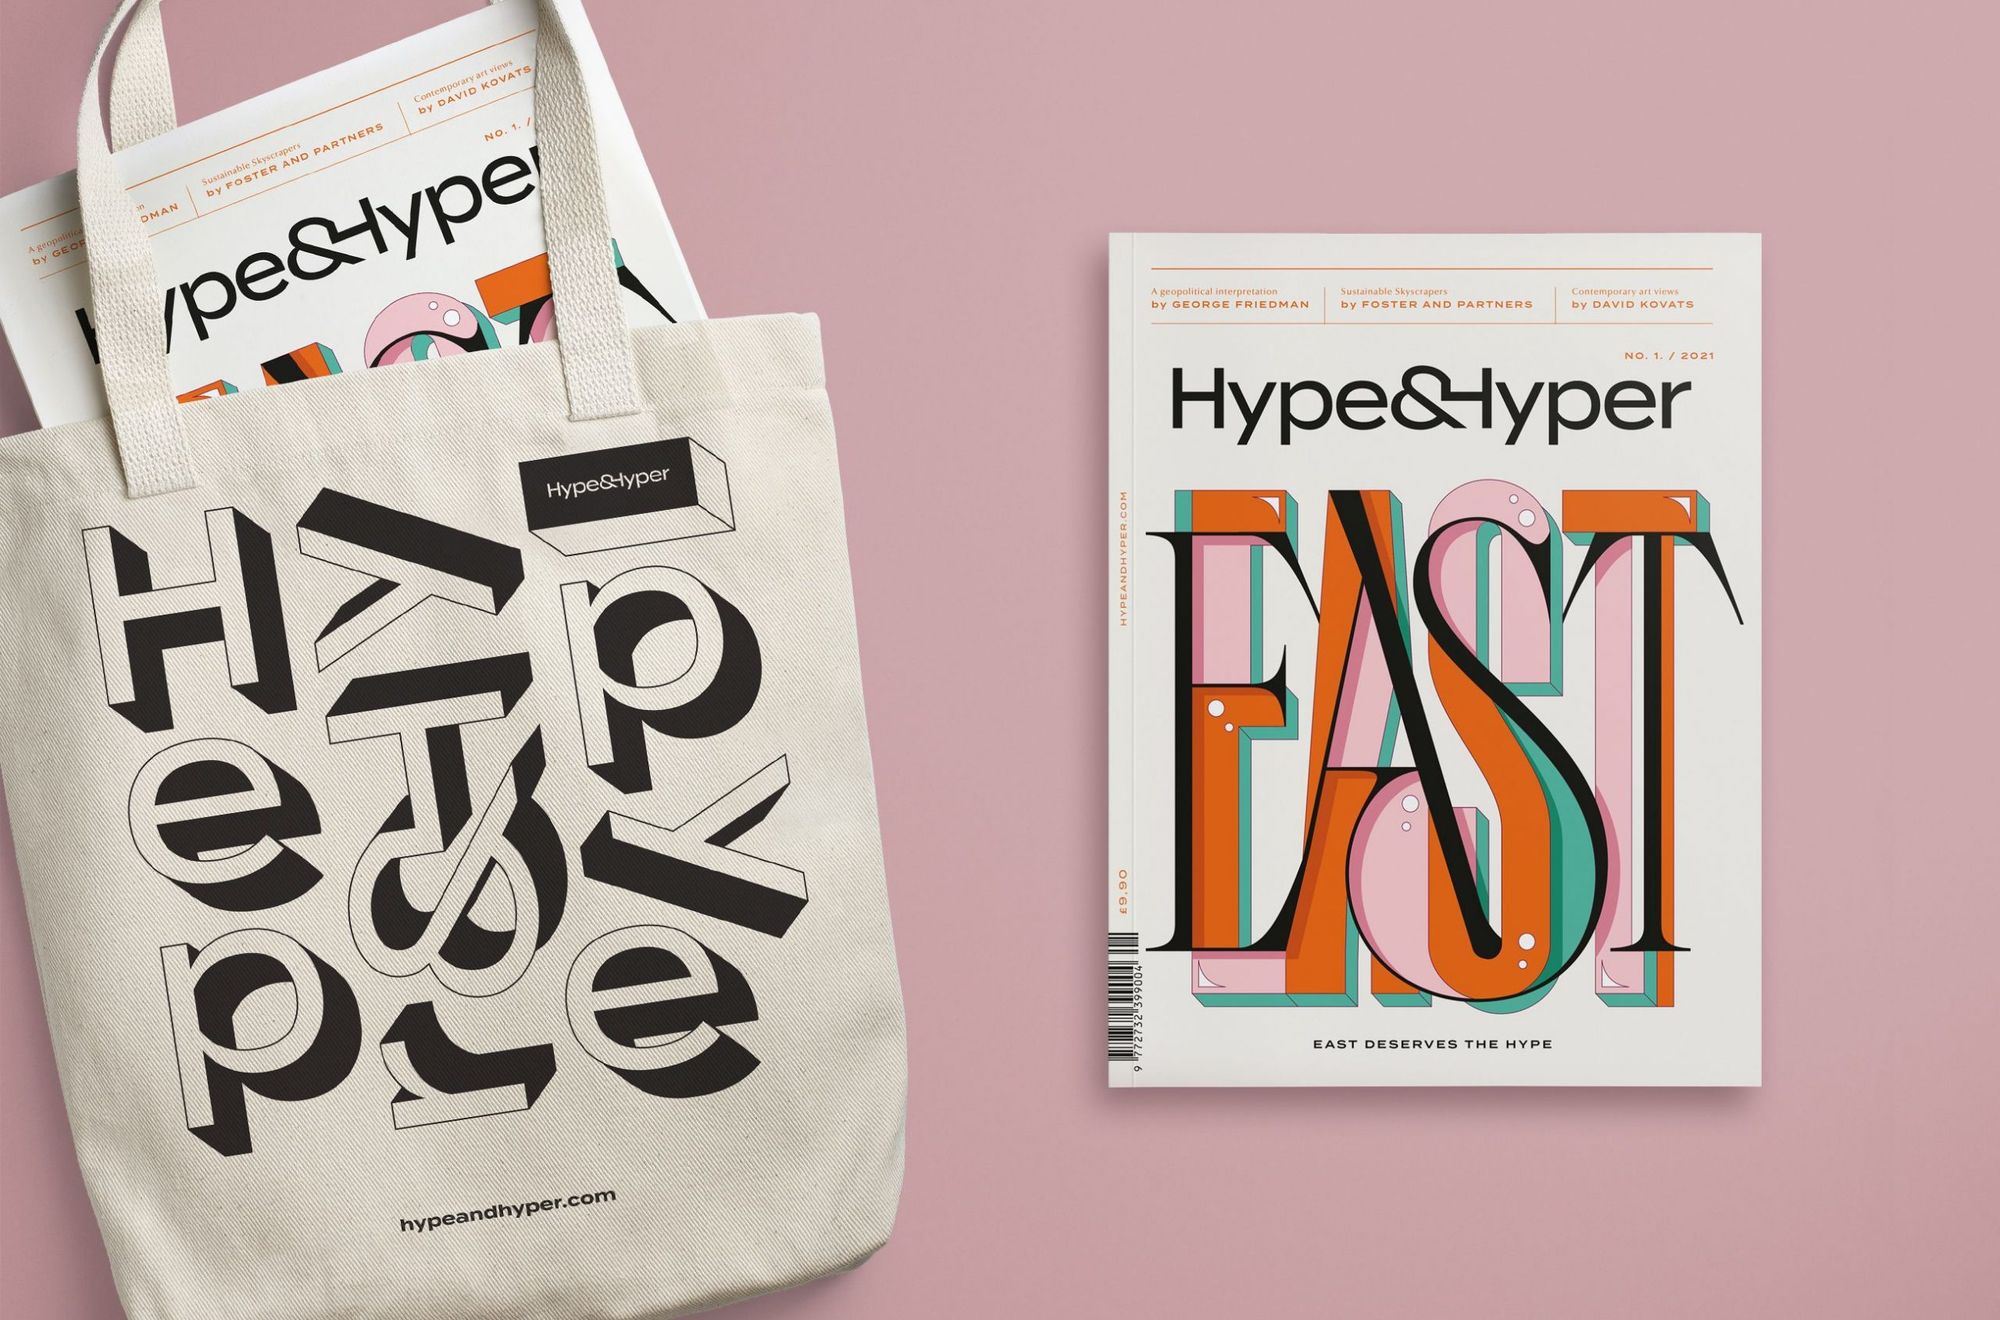 The first printed issue of Hype&Hyper is now available for pre-order!